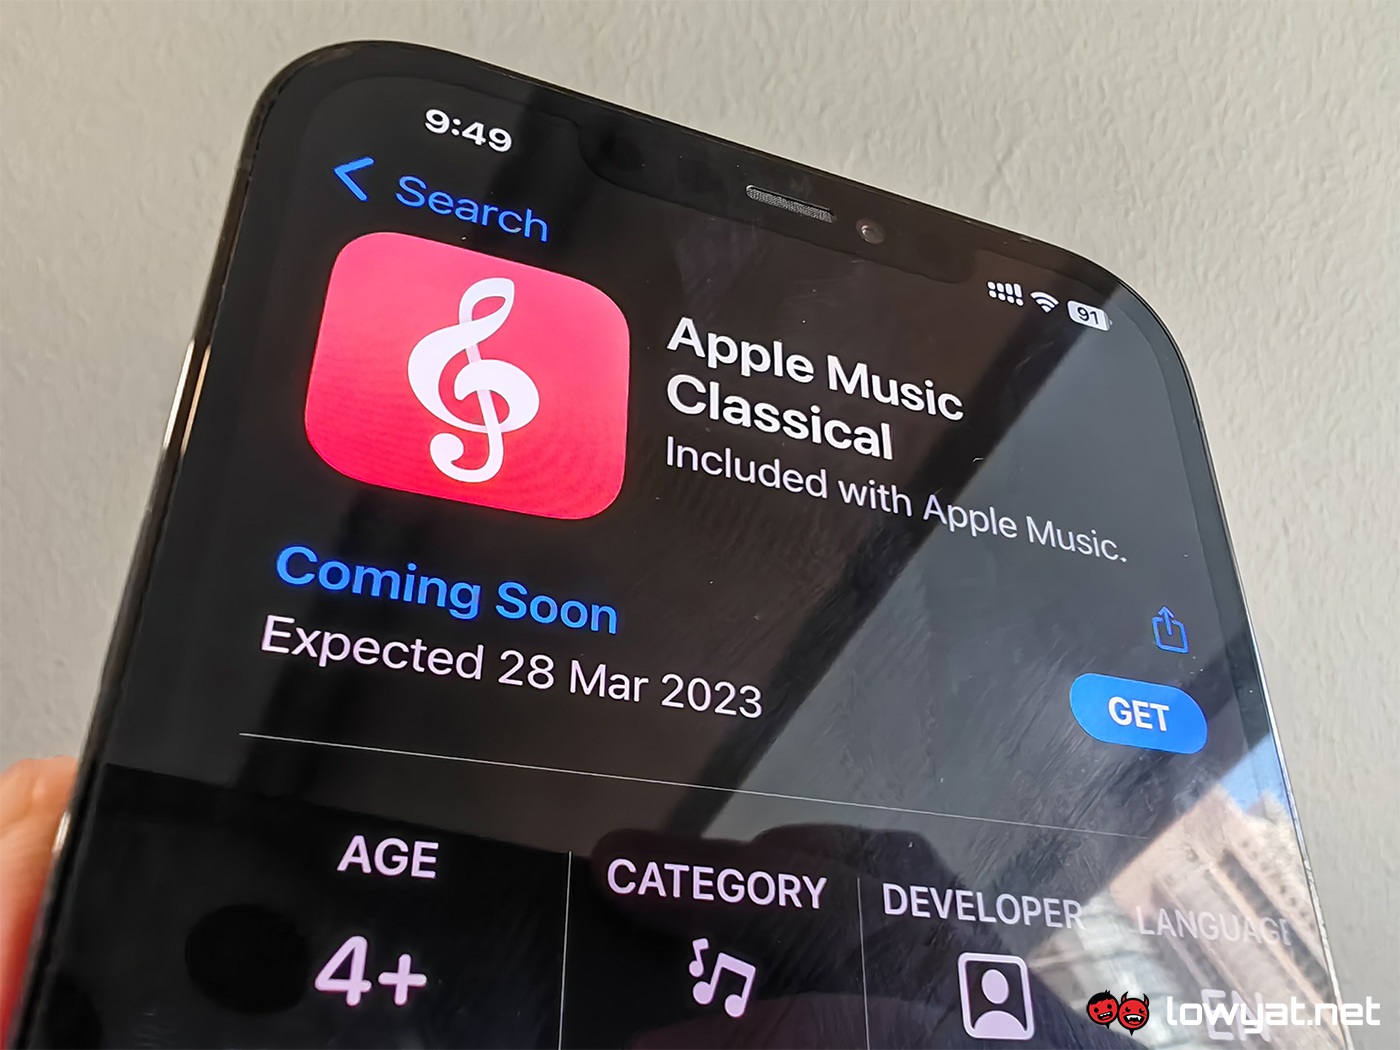 Apple Music Classical is scheduled to launch on March 28th